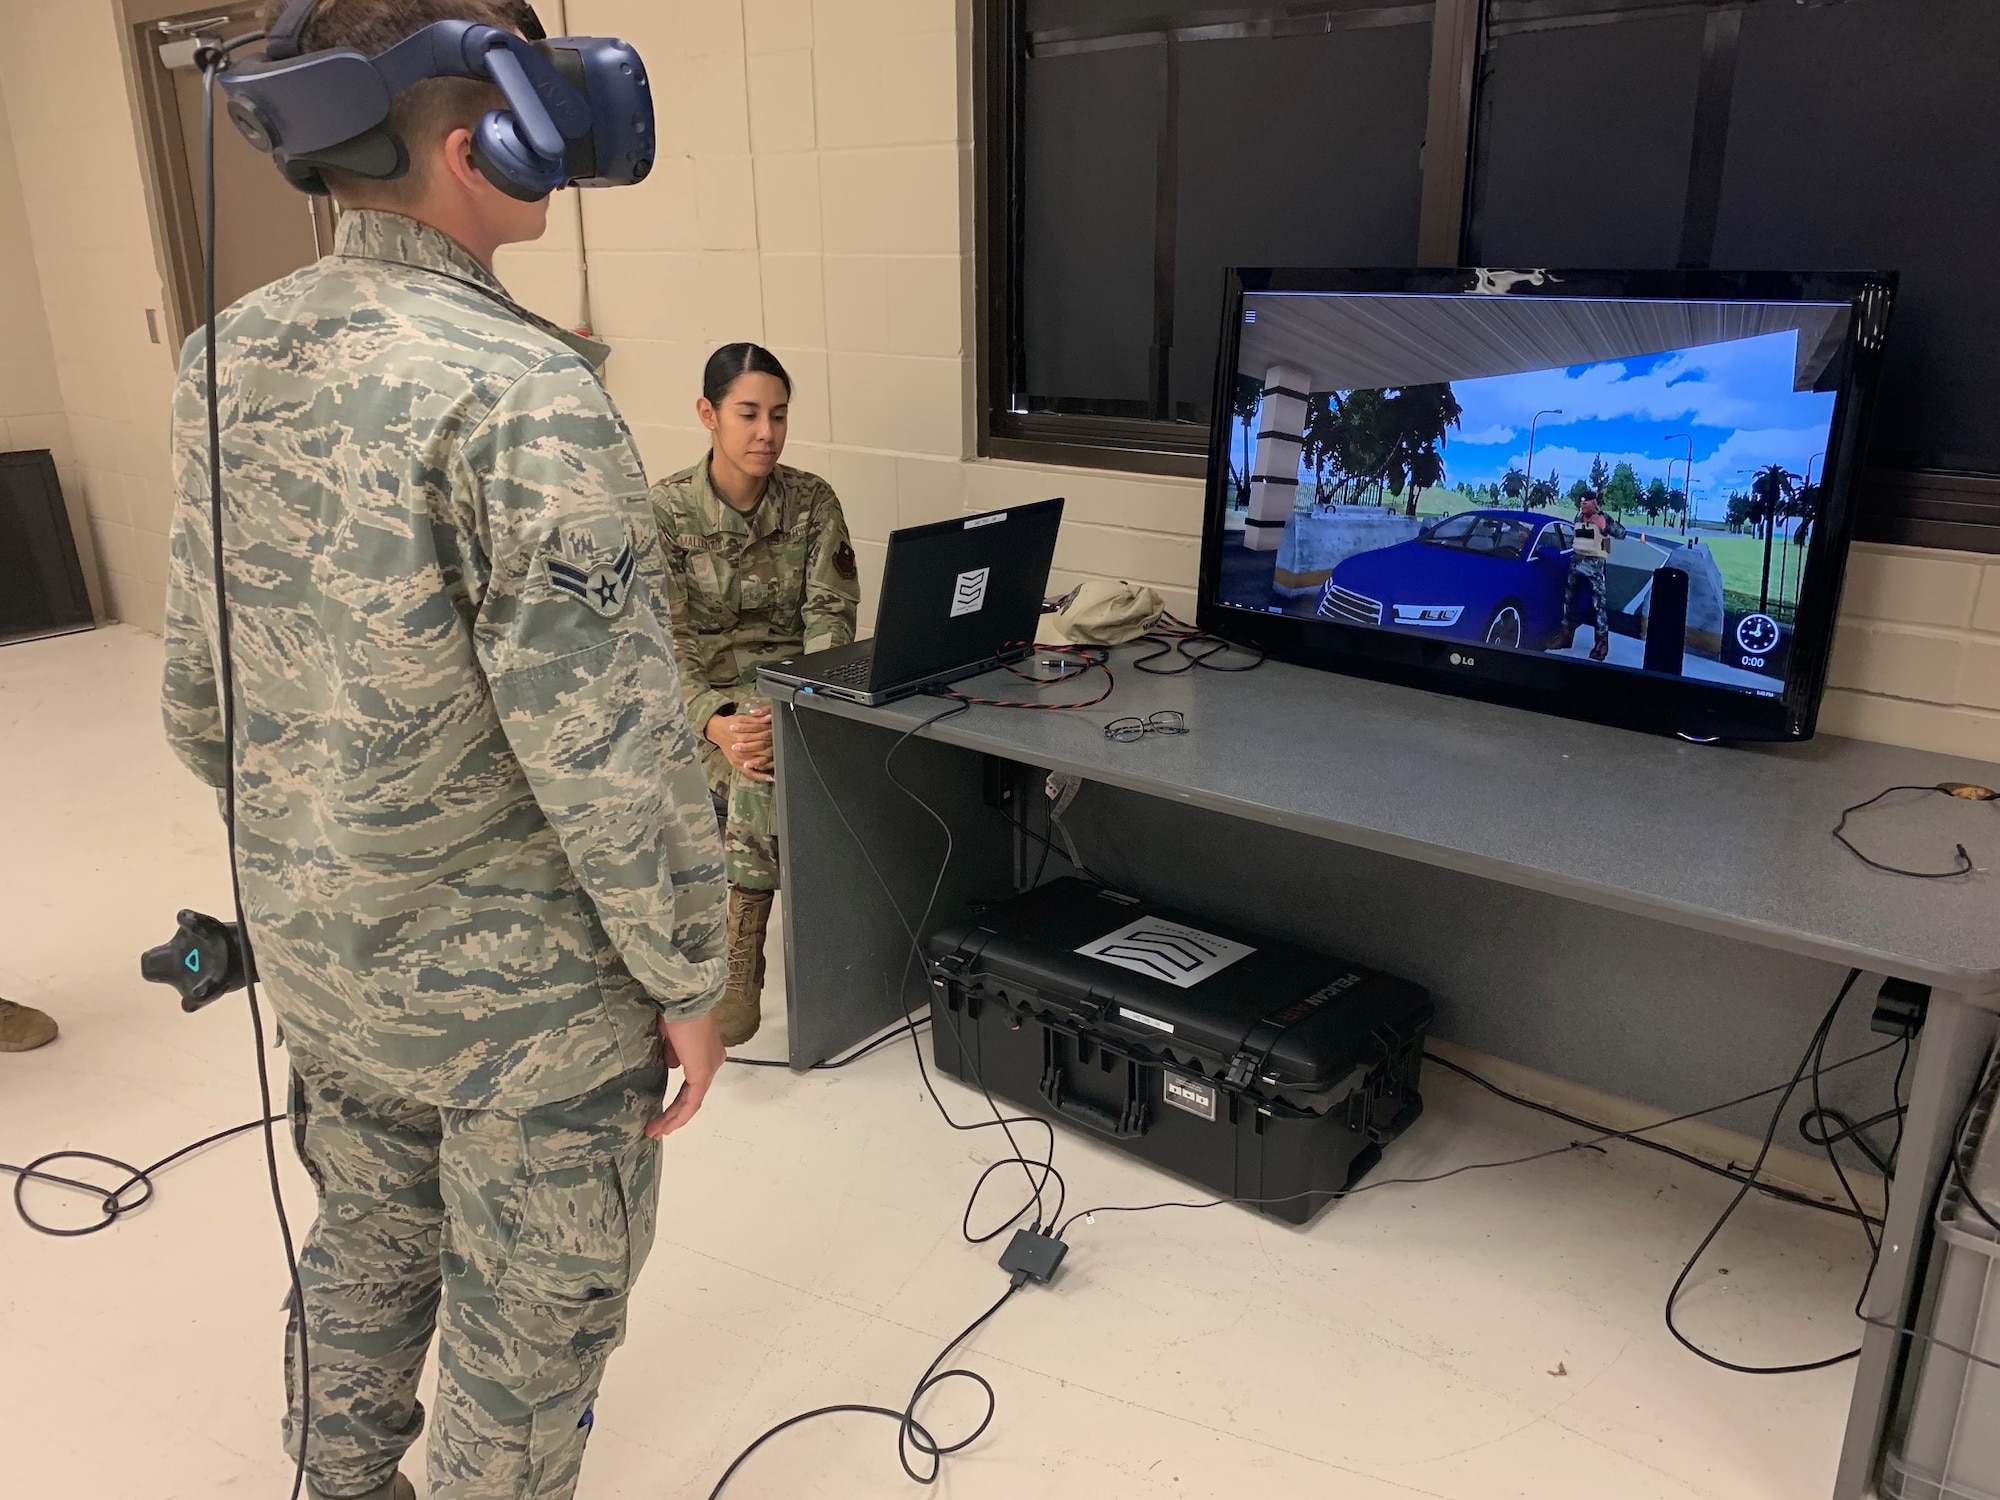 Airman 1st Class Taylor Waldron, a recent graduate of the Security Forces apprentice course, participates in a use of force training scenario in virtual reality environment simulator as Staff Sgt. Marcia Maldonado, 343rd Training Squadron instructor, facilitates training at Joint Base San Antonio-Lackland, Texas,May 29, 2019. The 343rd Training Squadron has added the VR training simulators as part of a beta-test in conjunction with a civilian vendor at no cost to the unit through a partnership with AFWERX.  (U.S. Air Force photo by Dan Hawkins)